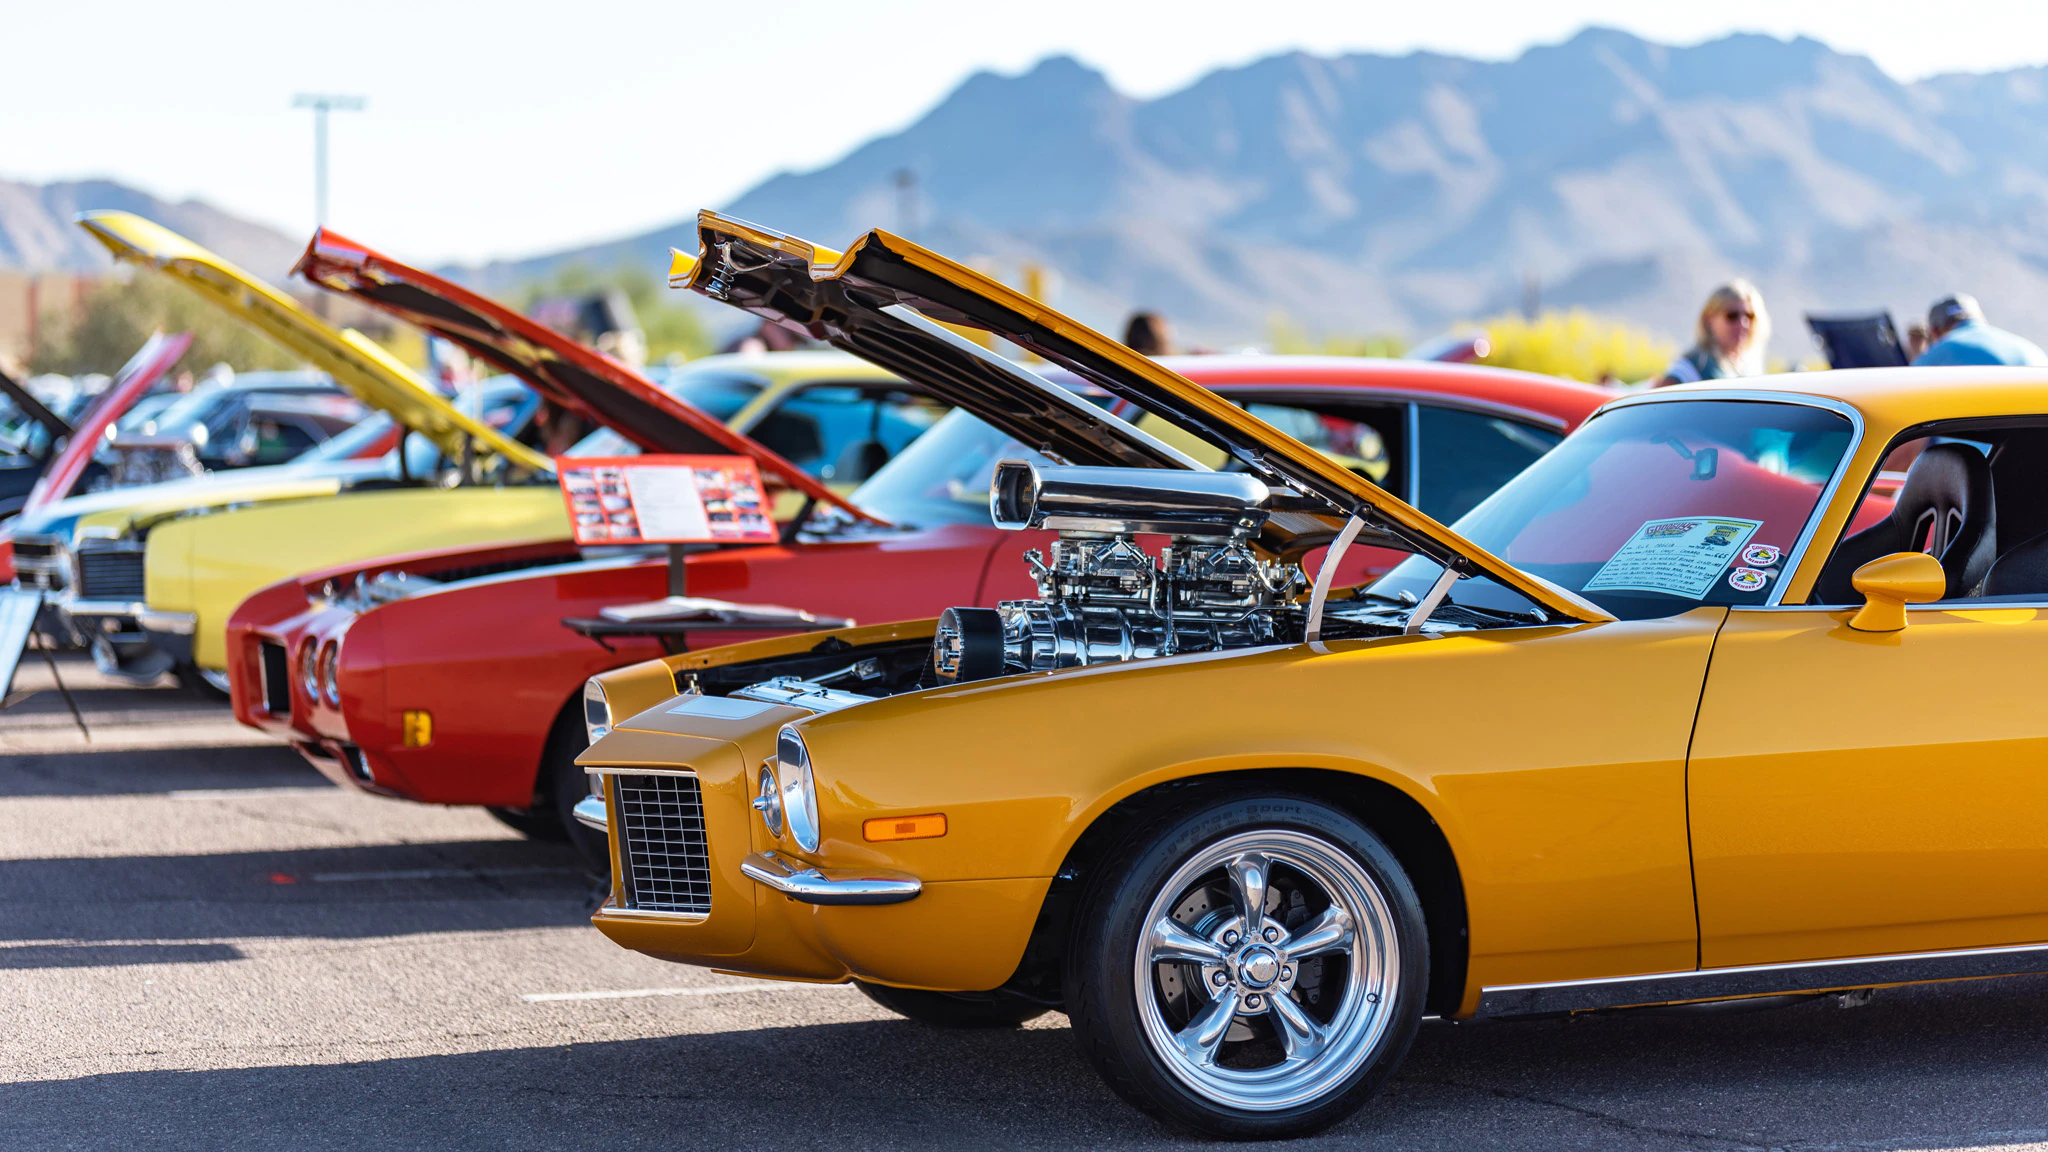 What is a Car Show?